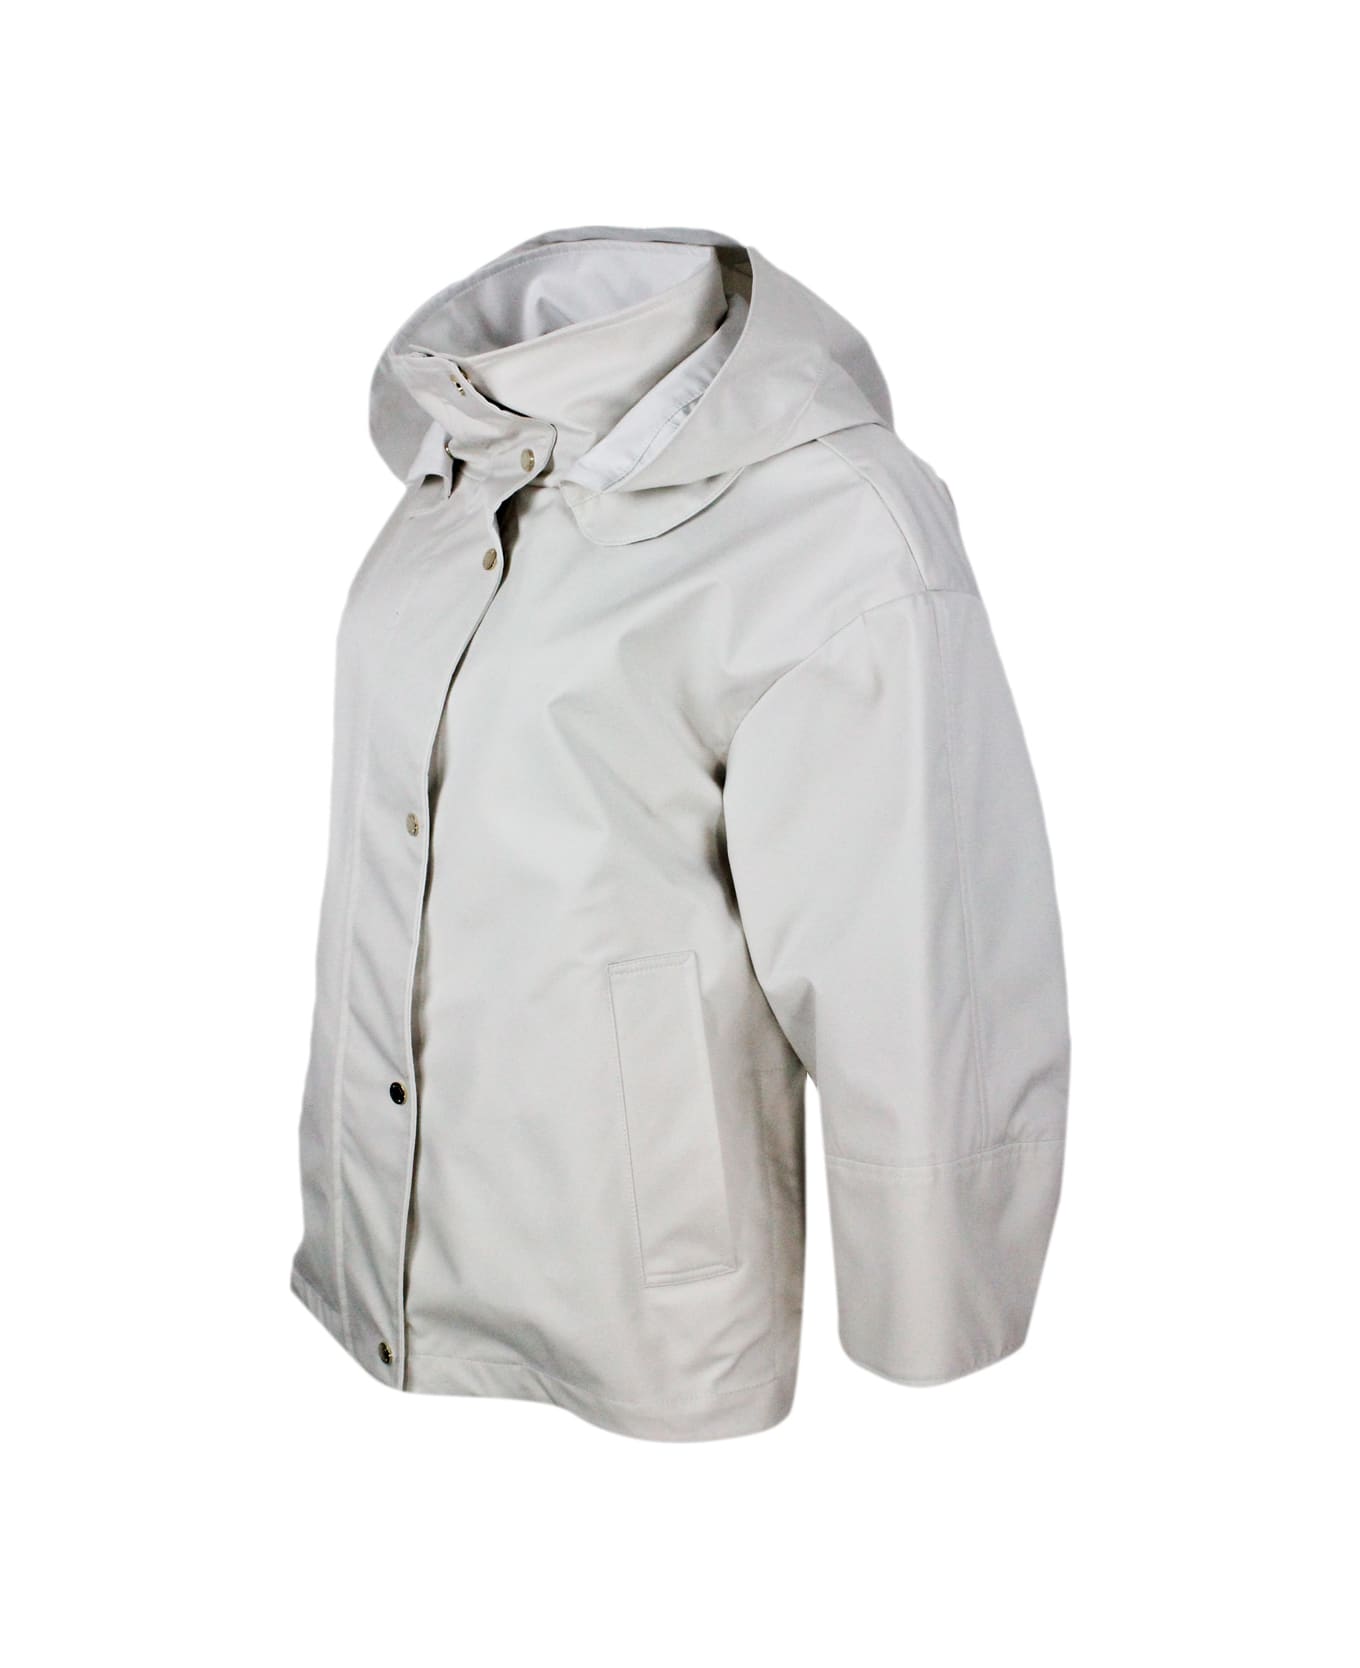 Moorer Jacket In Fine Waterproof Material 2 Umbrellas With Detachable Hood, Side Zips On The Sides And Internal Drawstring. Zip And Snap Button Closure - Avorio light bianco